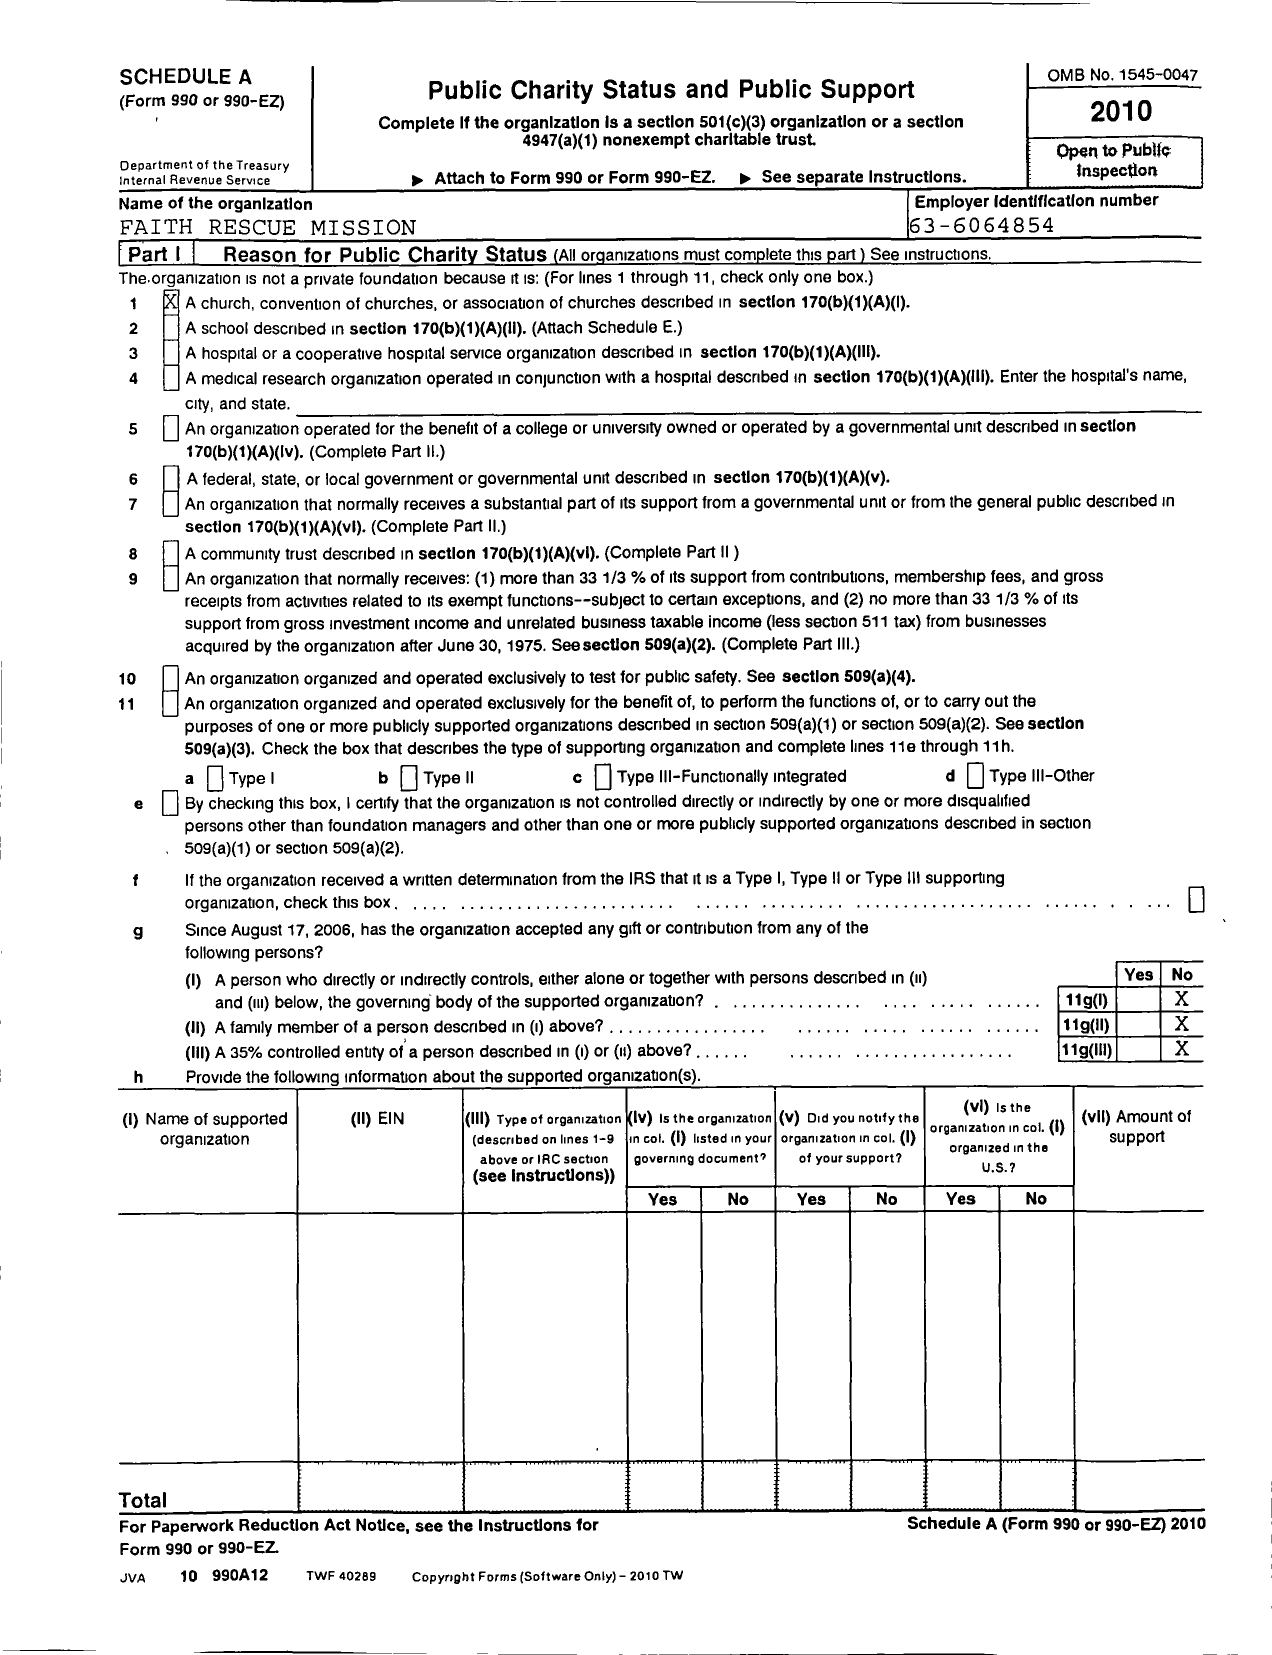 Image of first page of 2010 Form 990R for Faith Rescue Mission